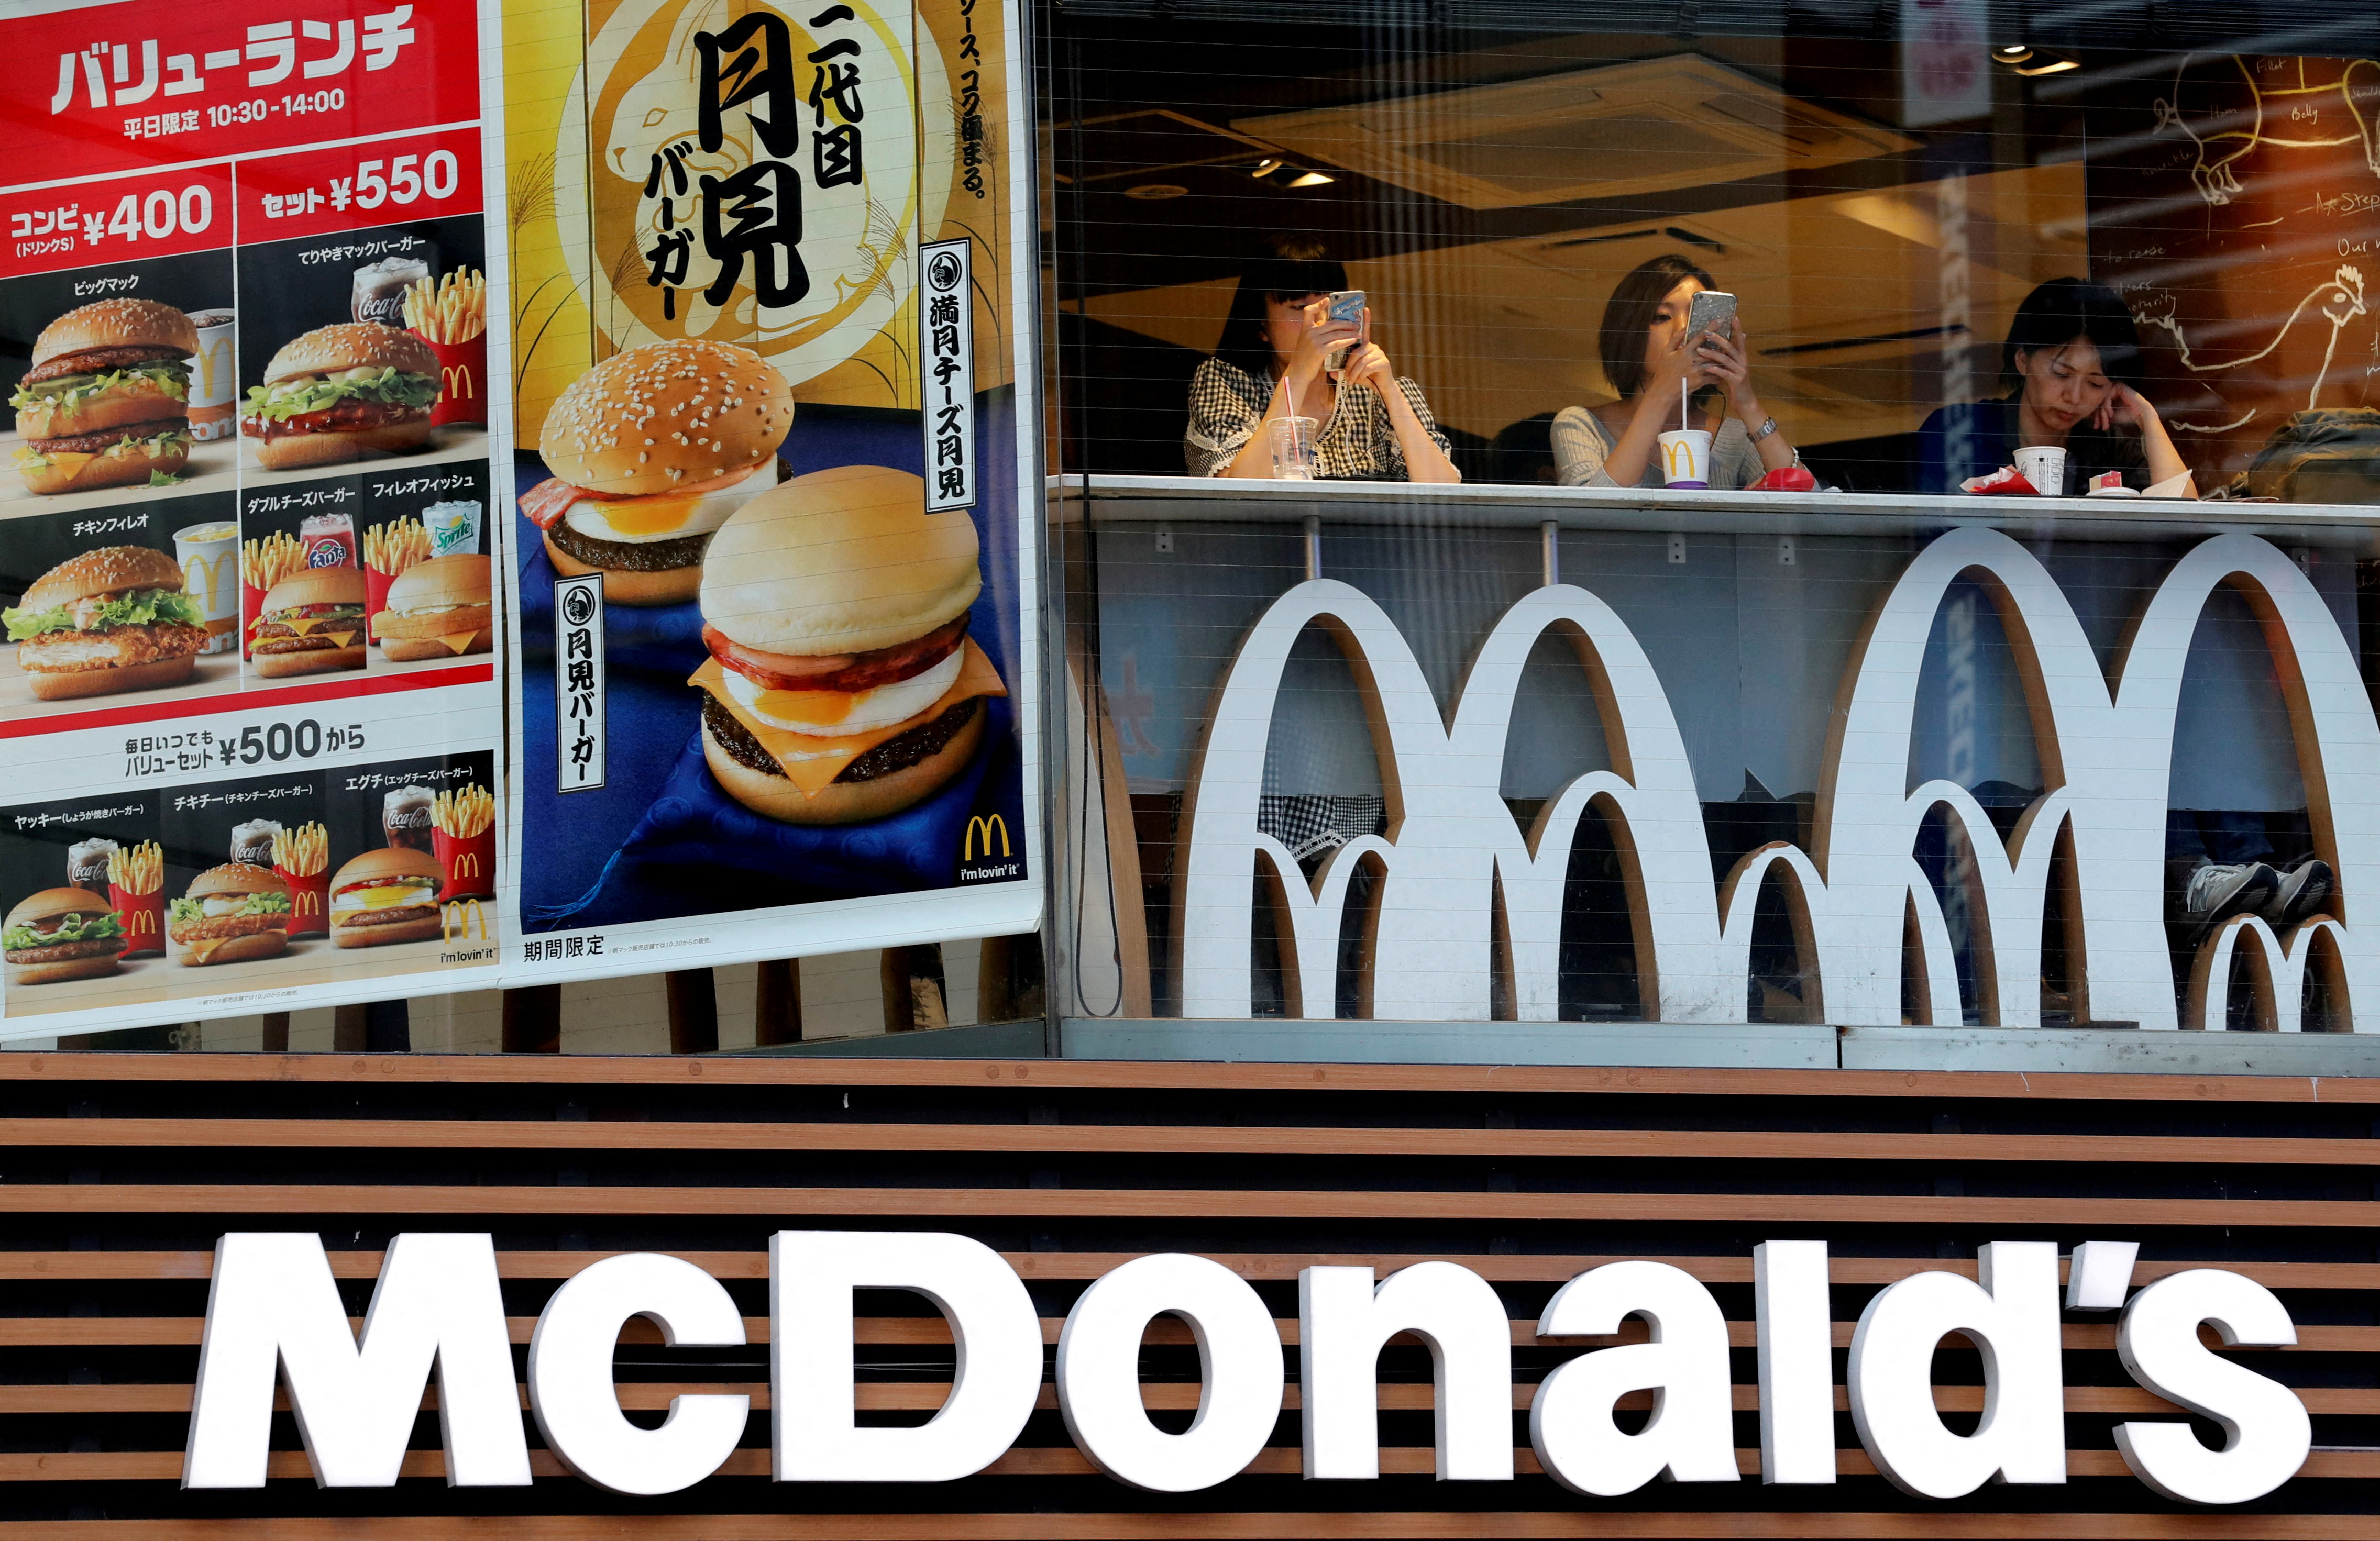 Customers are seen at a McDonald's fast food restaurant in Tokyo